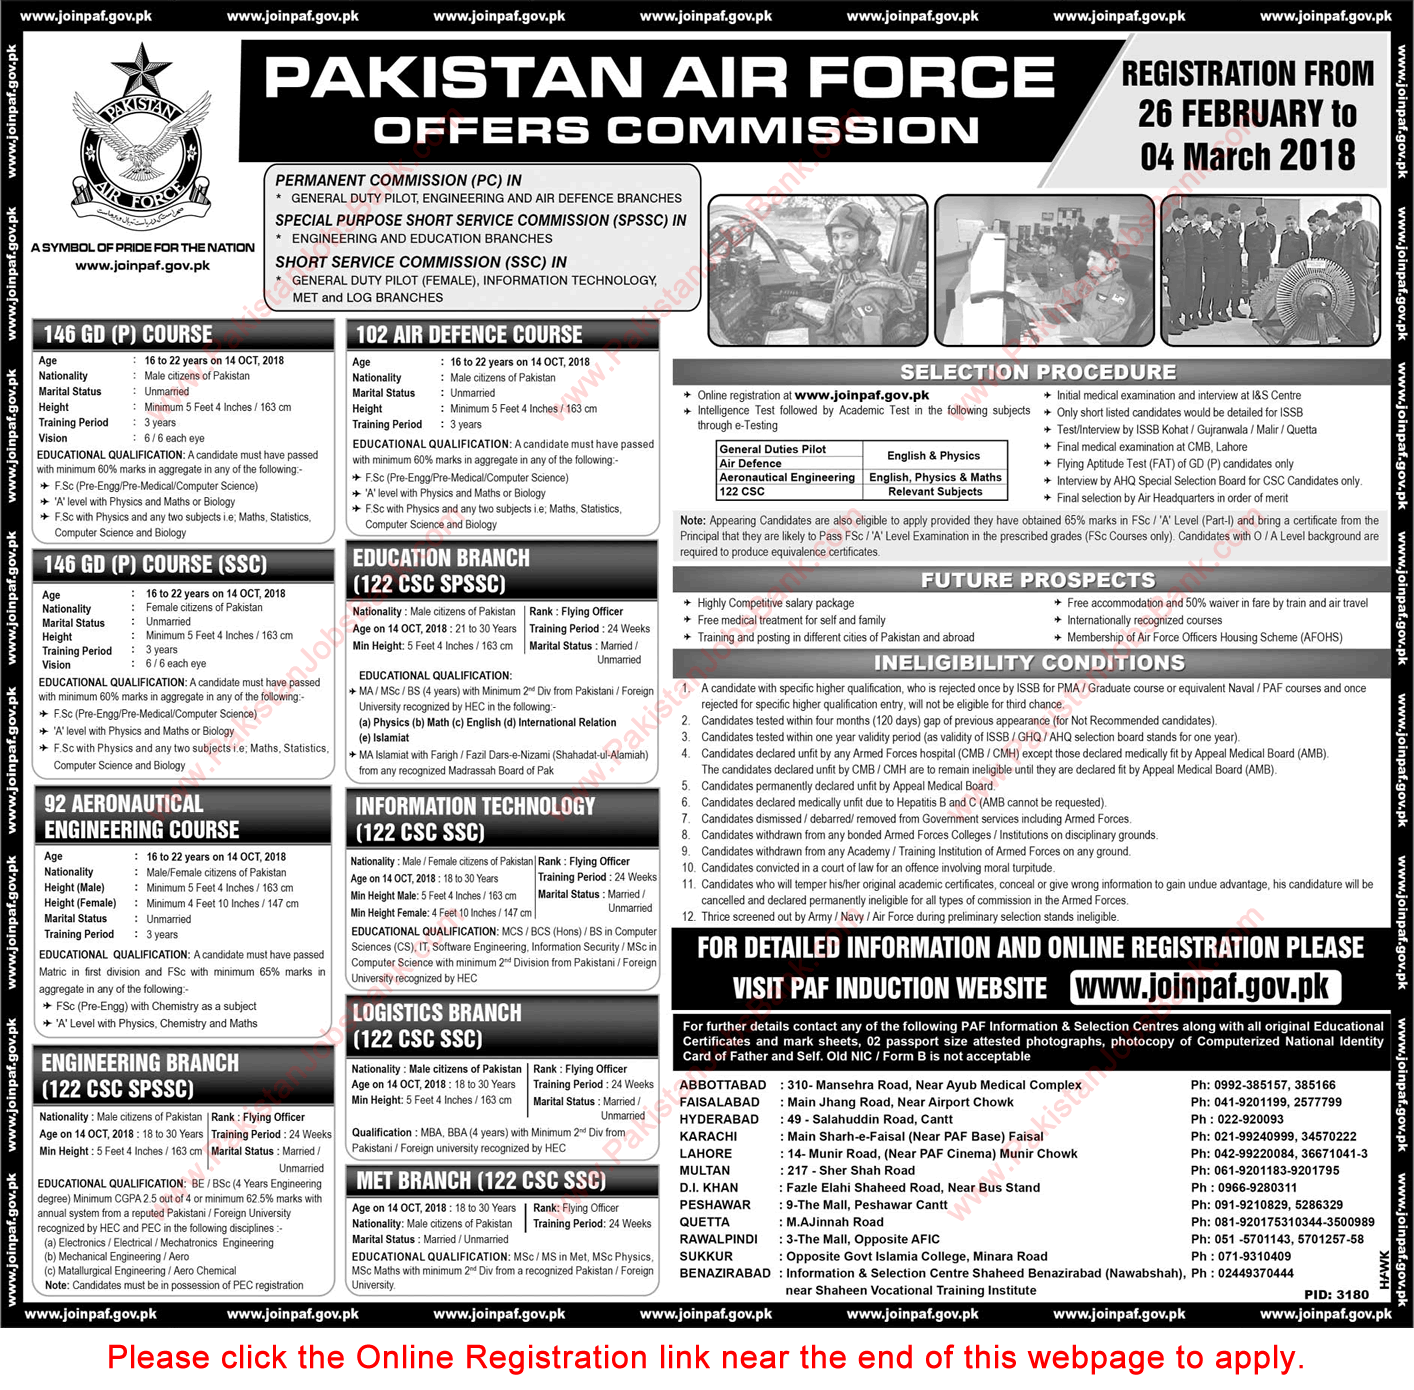 Join Pakistan Air Force February 2018 Online Registration SPSSC, SSC & Permanent Commission Latest